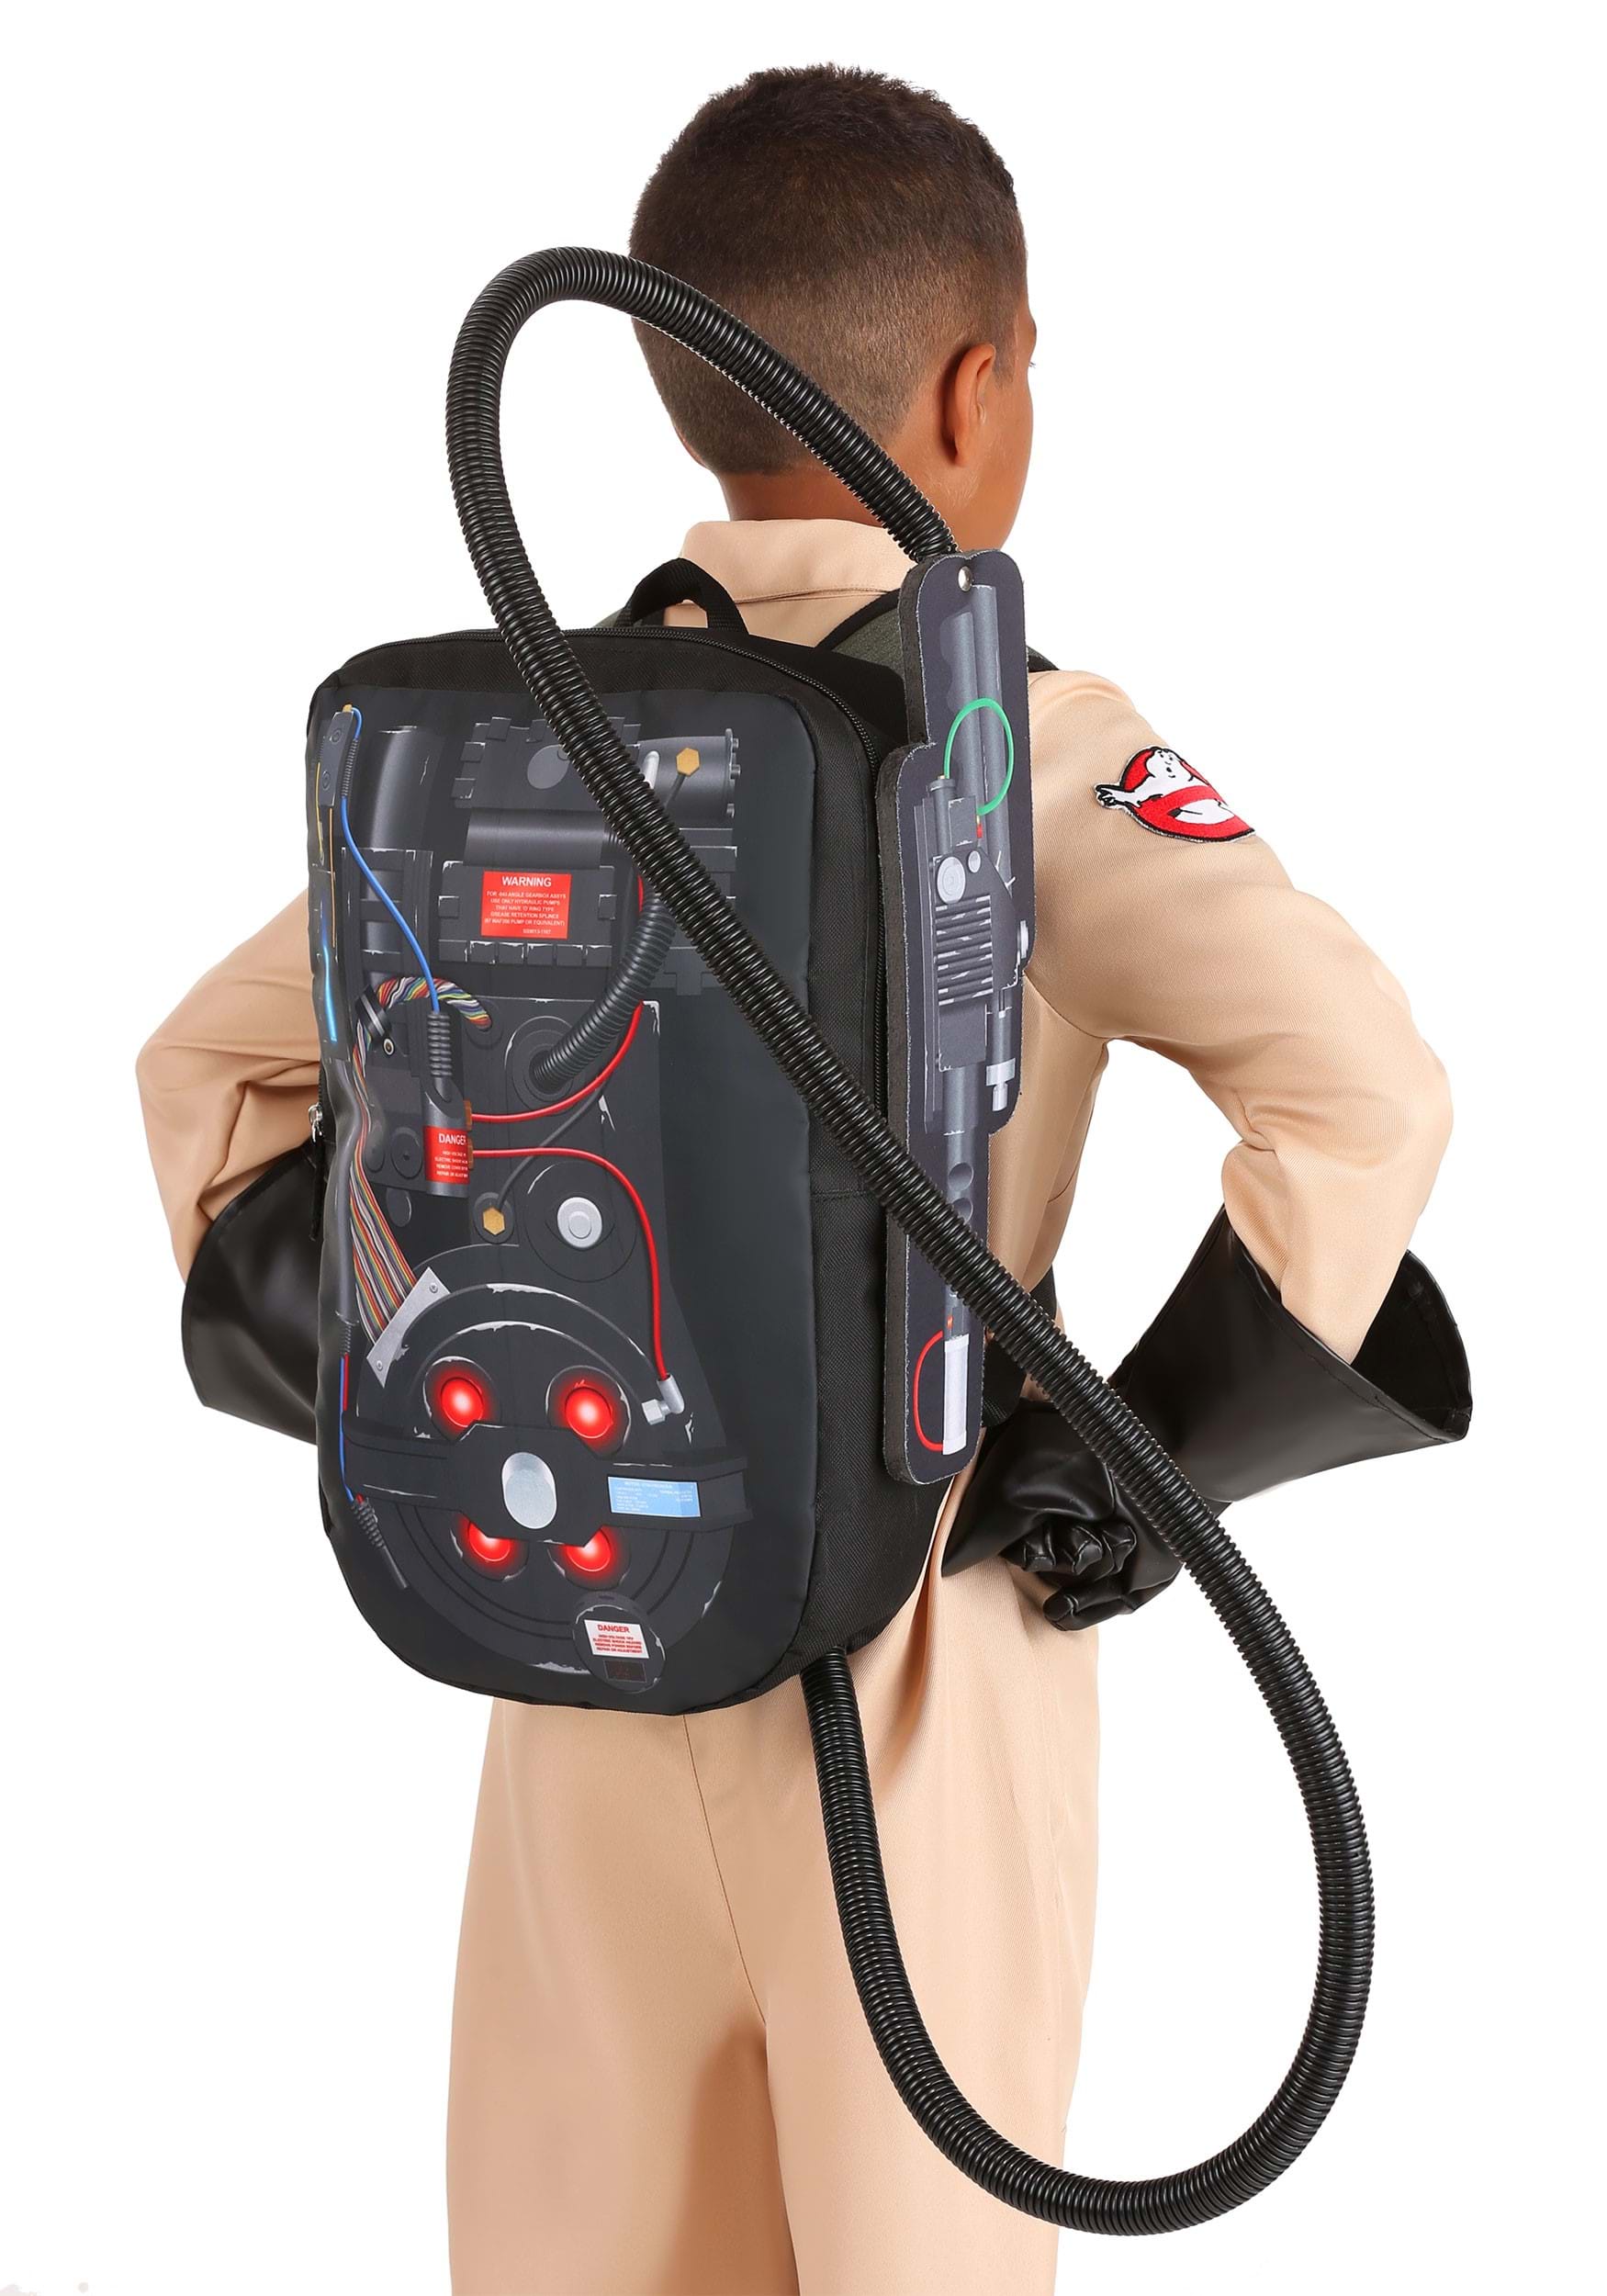 Ghostbuster Proton Pack For Kids